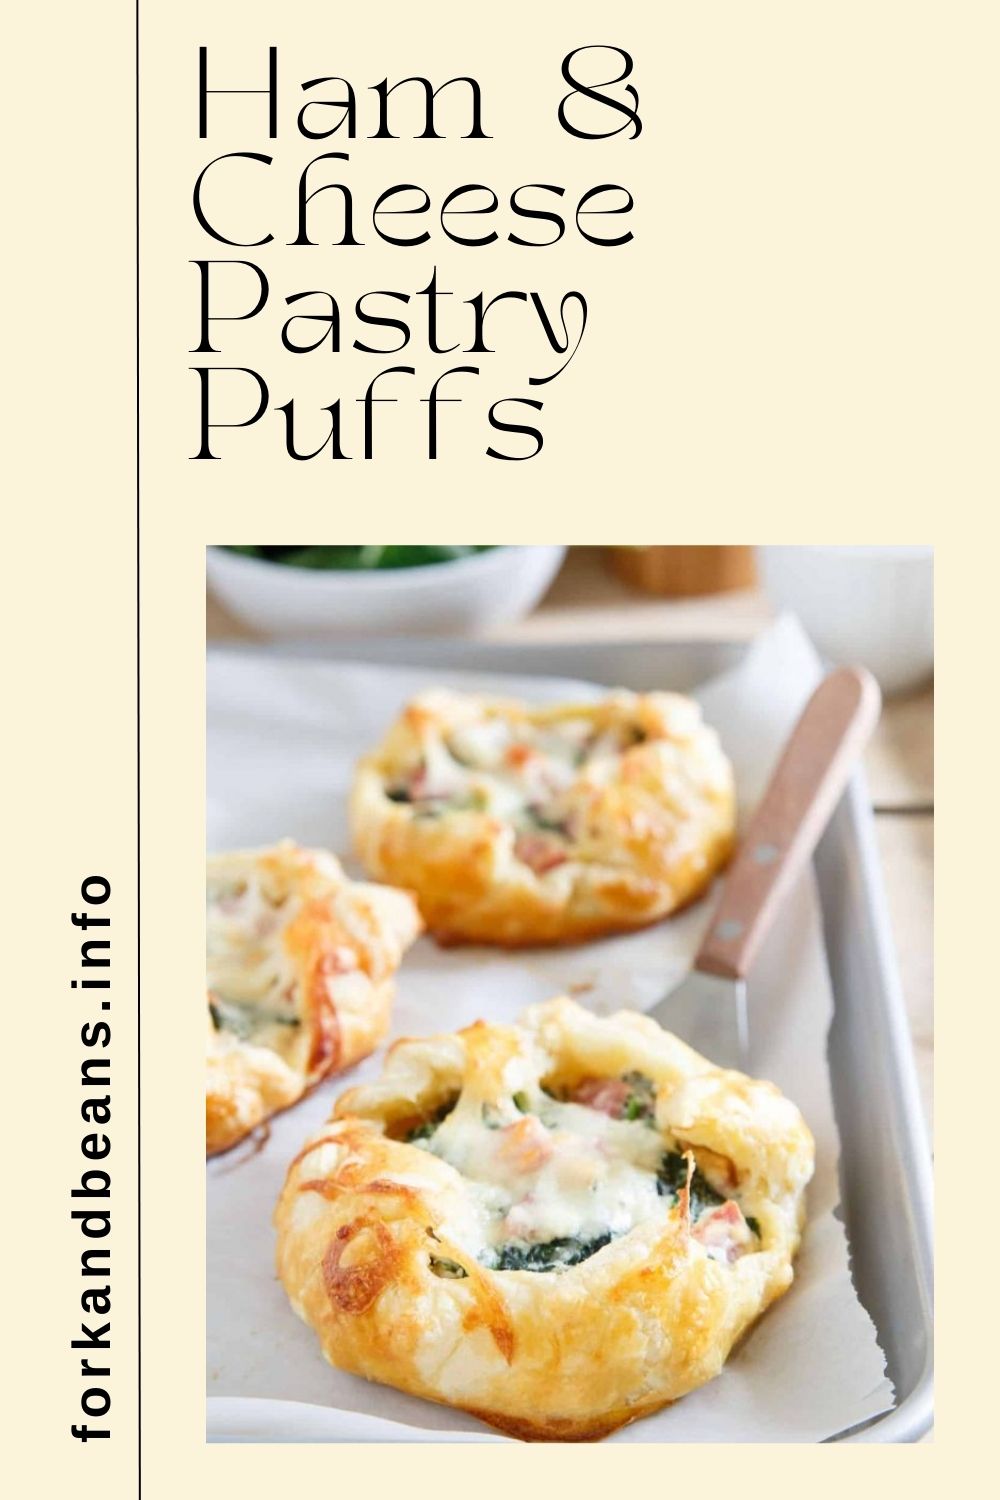 MINI BREAKFAST PIES WITH HAM CHEESE AND SPINACH